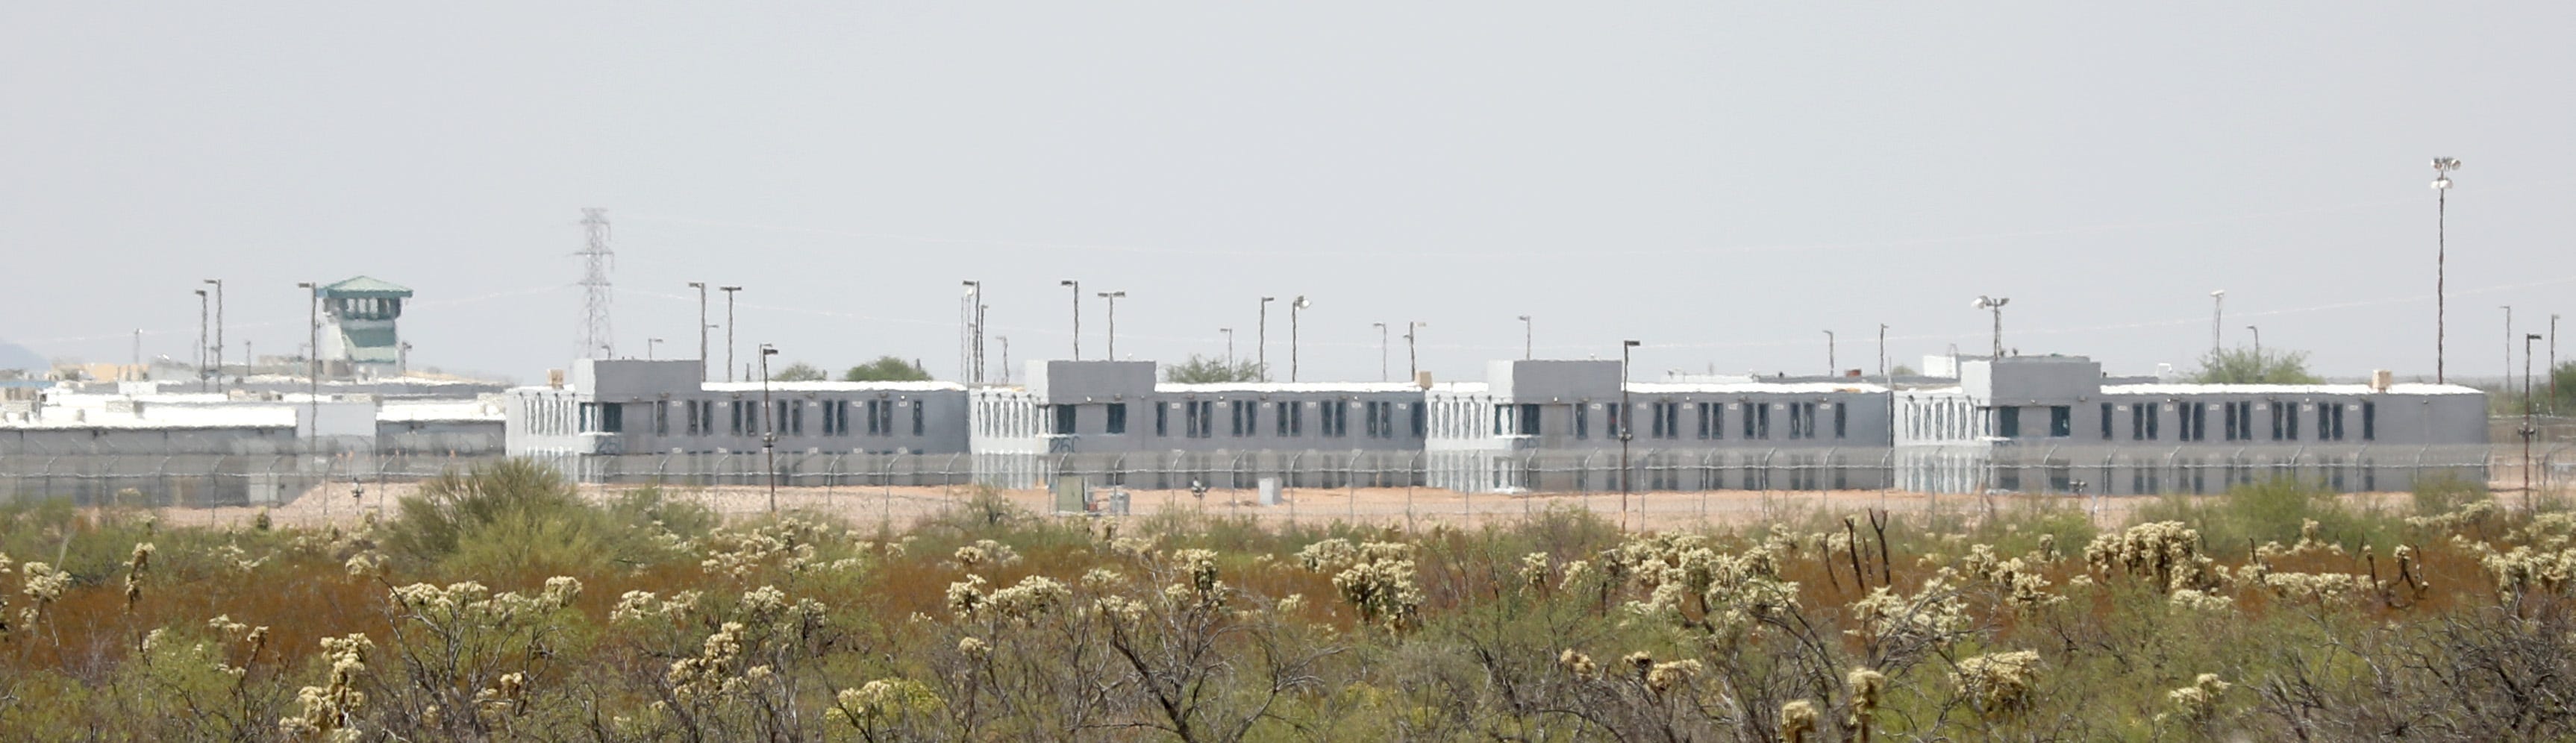 Cell blocks at the Arizona State Prison Complex Tucson on Aug. 28, 2020.